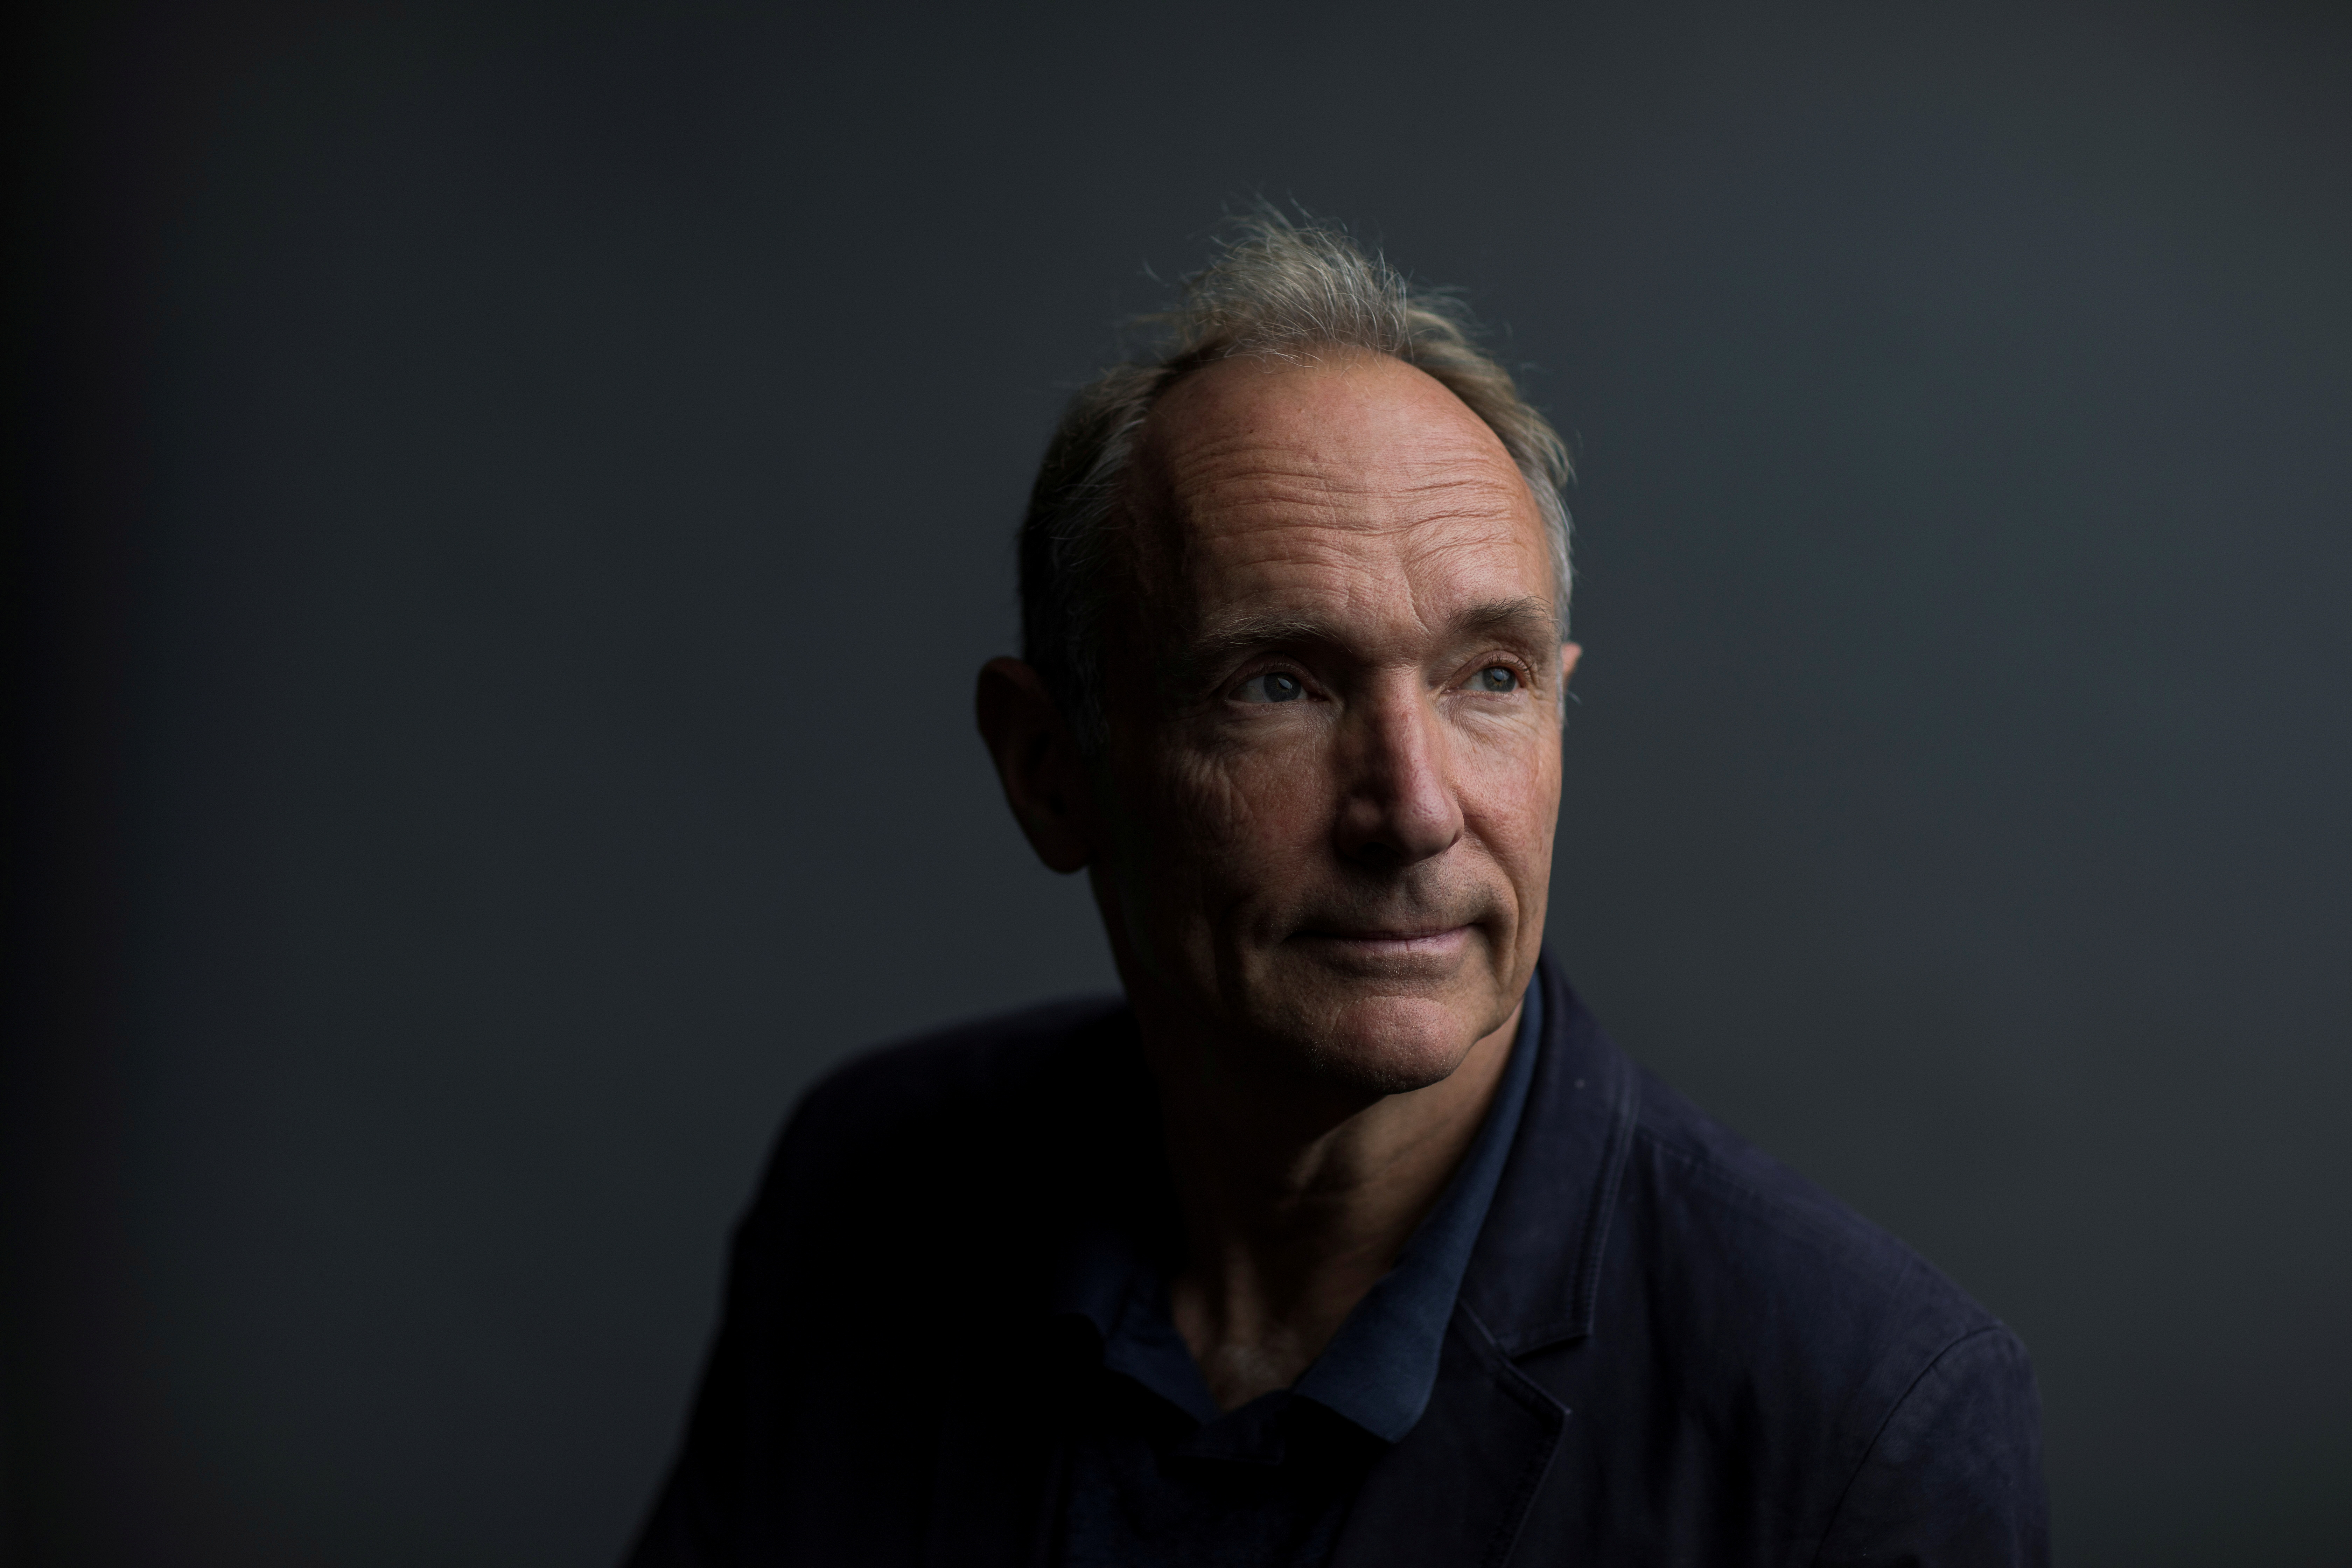 World Wide Web founder Tim Berners-Lee poses for a photograph following a speech at the Mozilla Festival 2018 in London